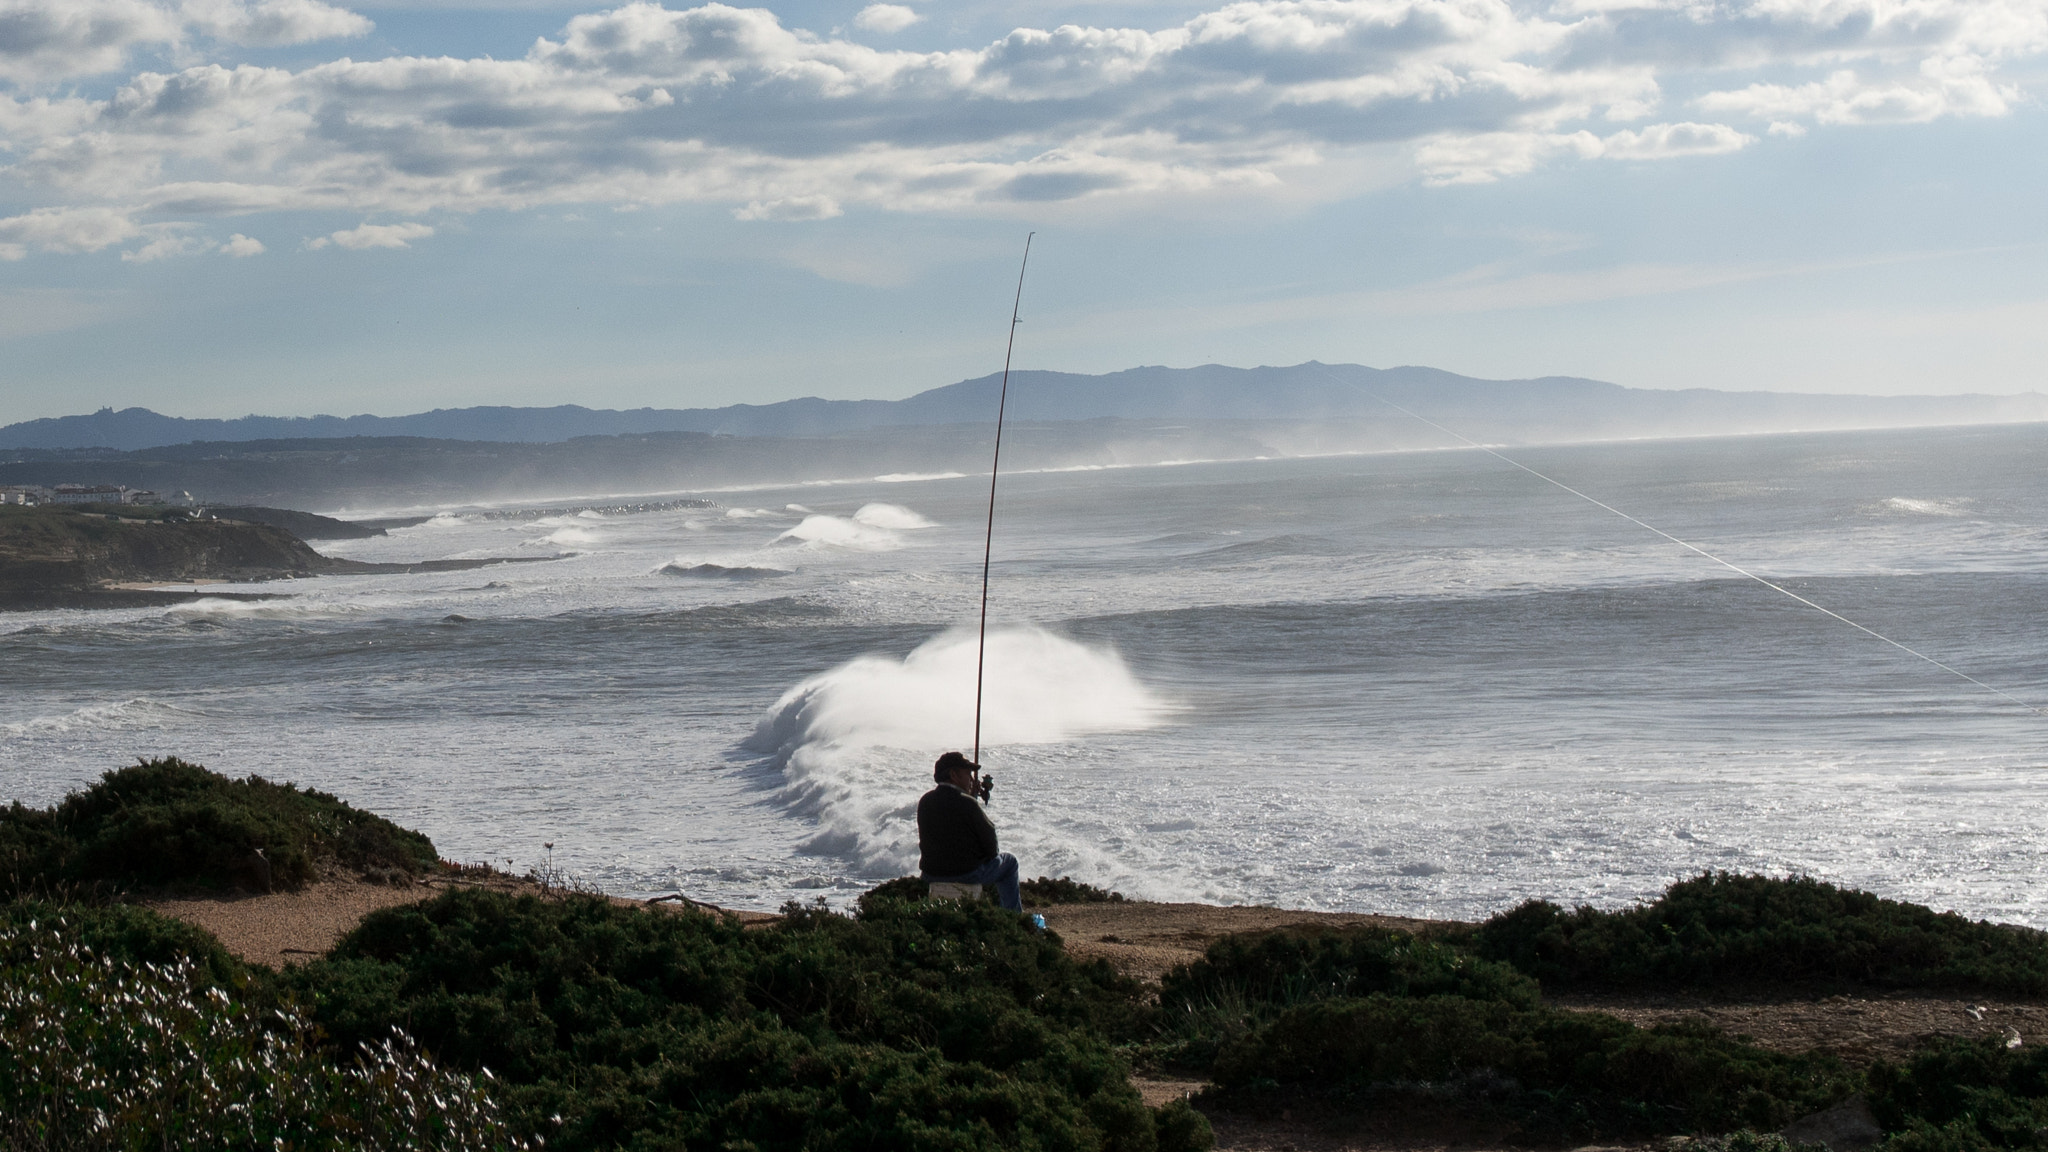 .7x Metabones 18-35/1.8 sample photo. Fisherman on the cliff photography